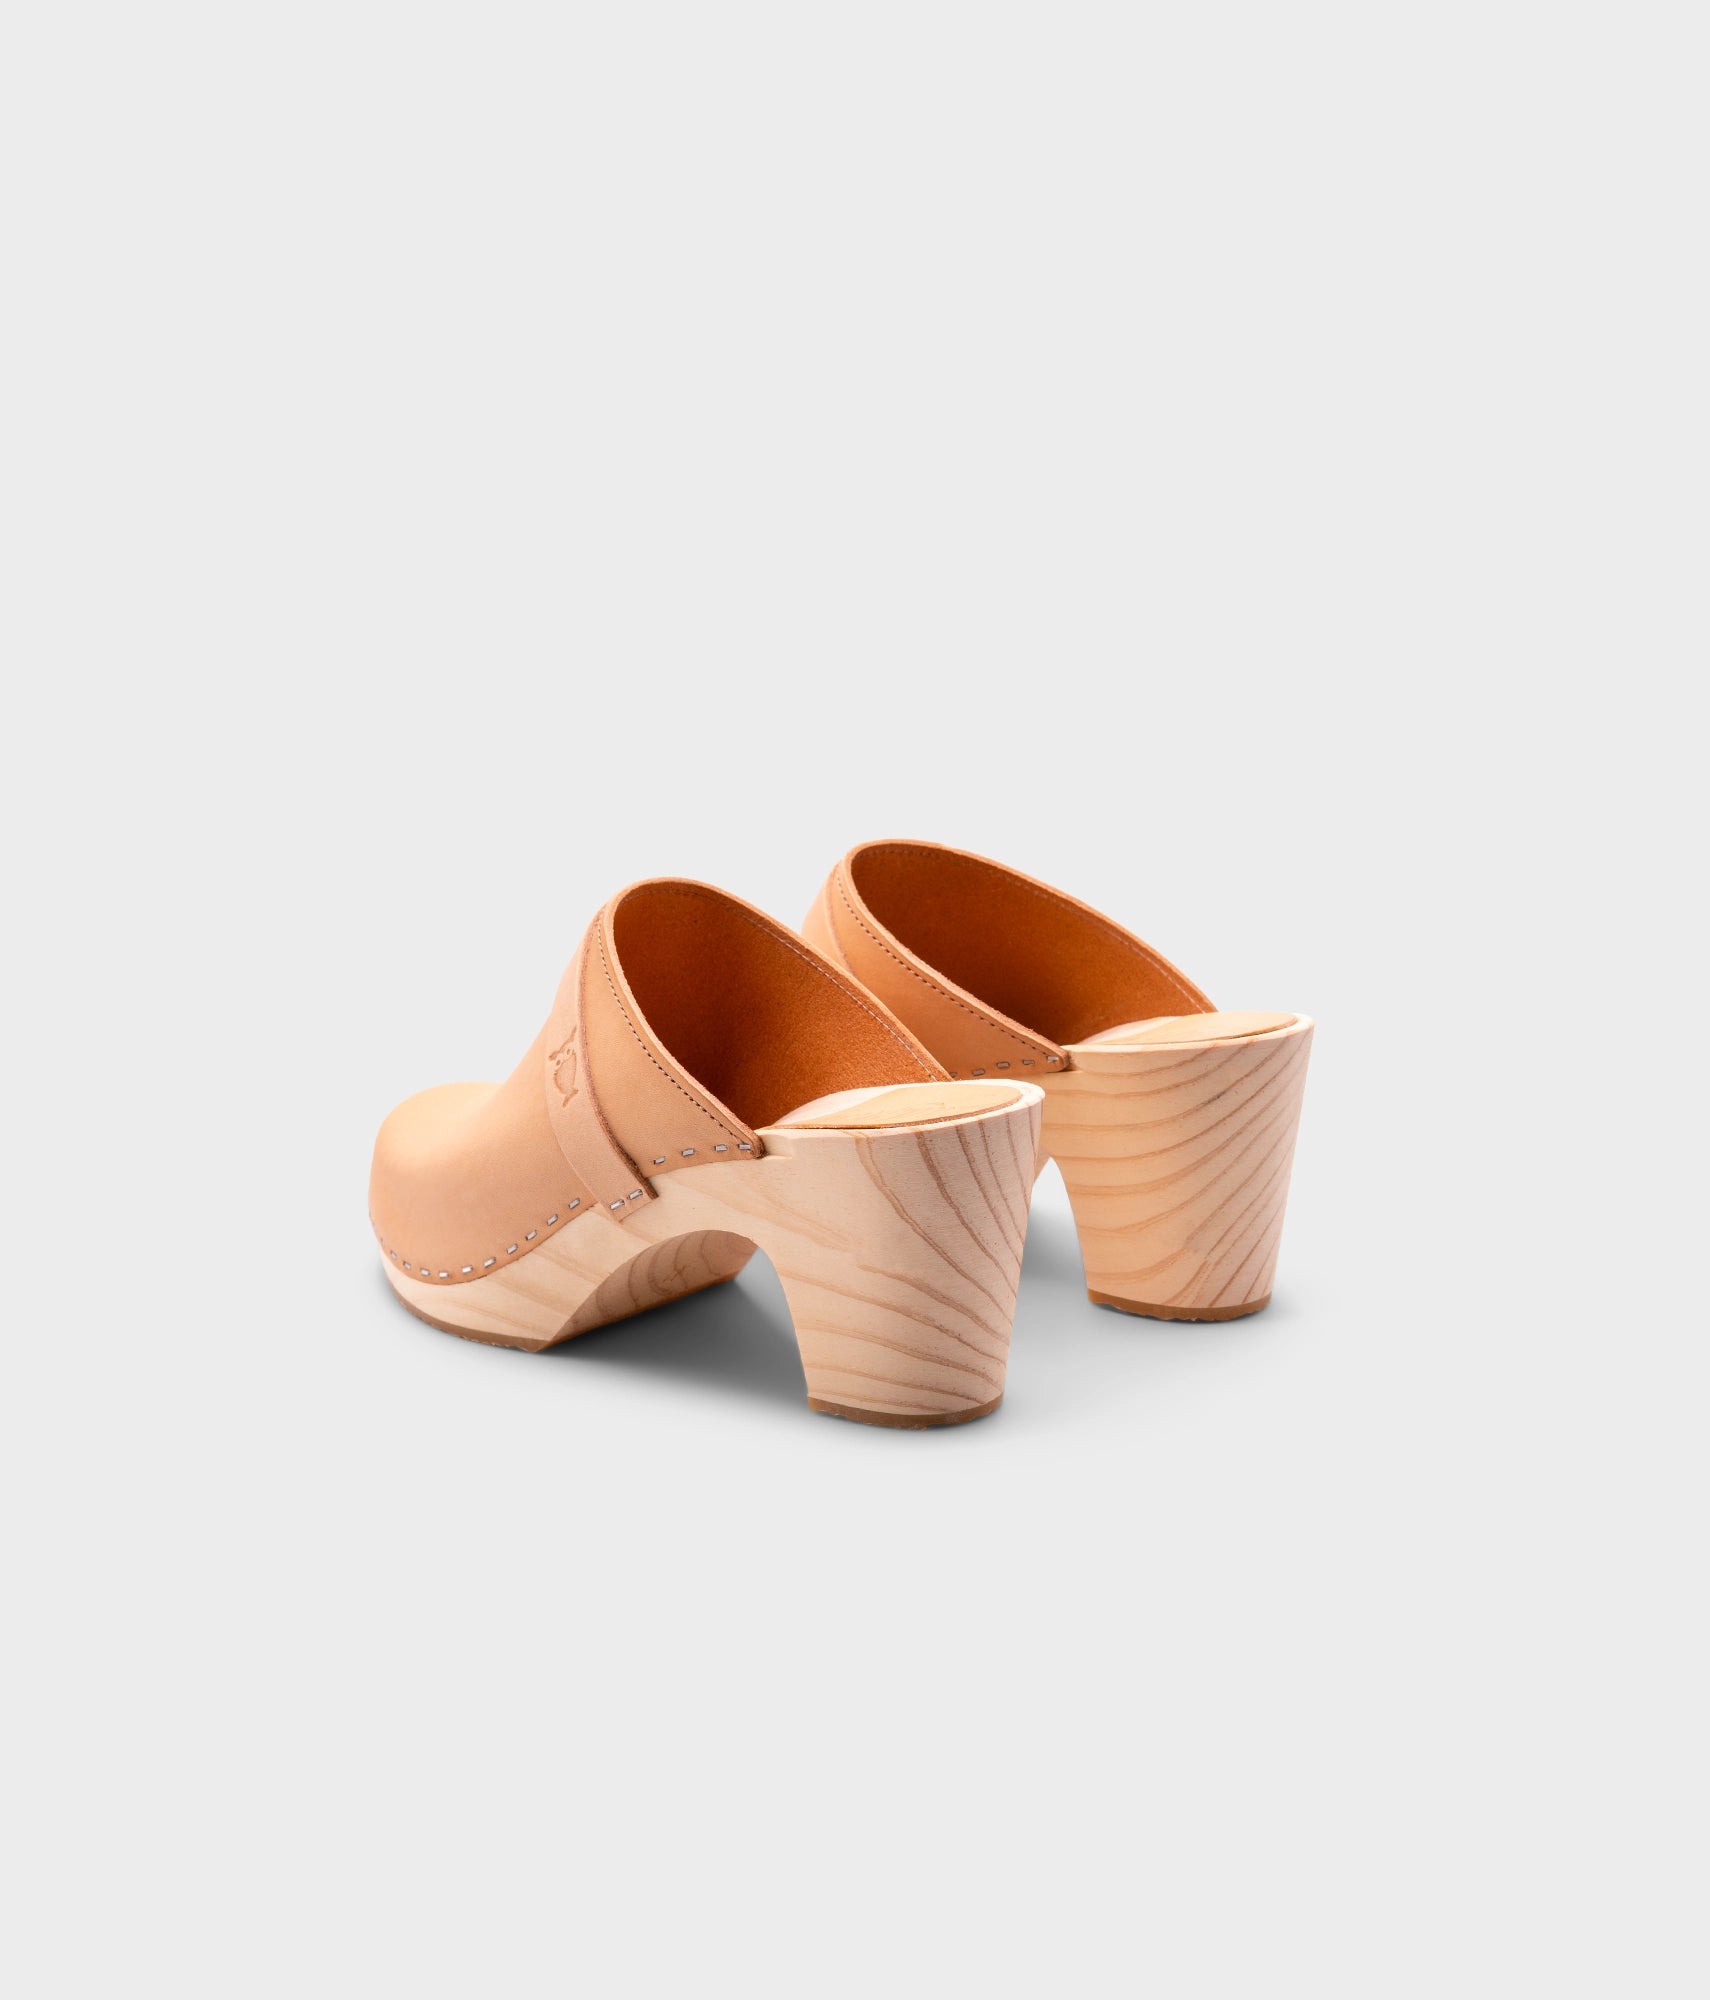 high rise classic clog mule in ecru beige vegetable tanned leather stapled on a light wooden base